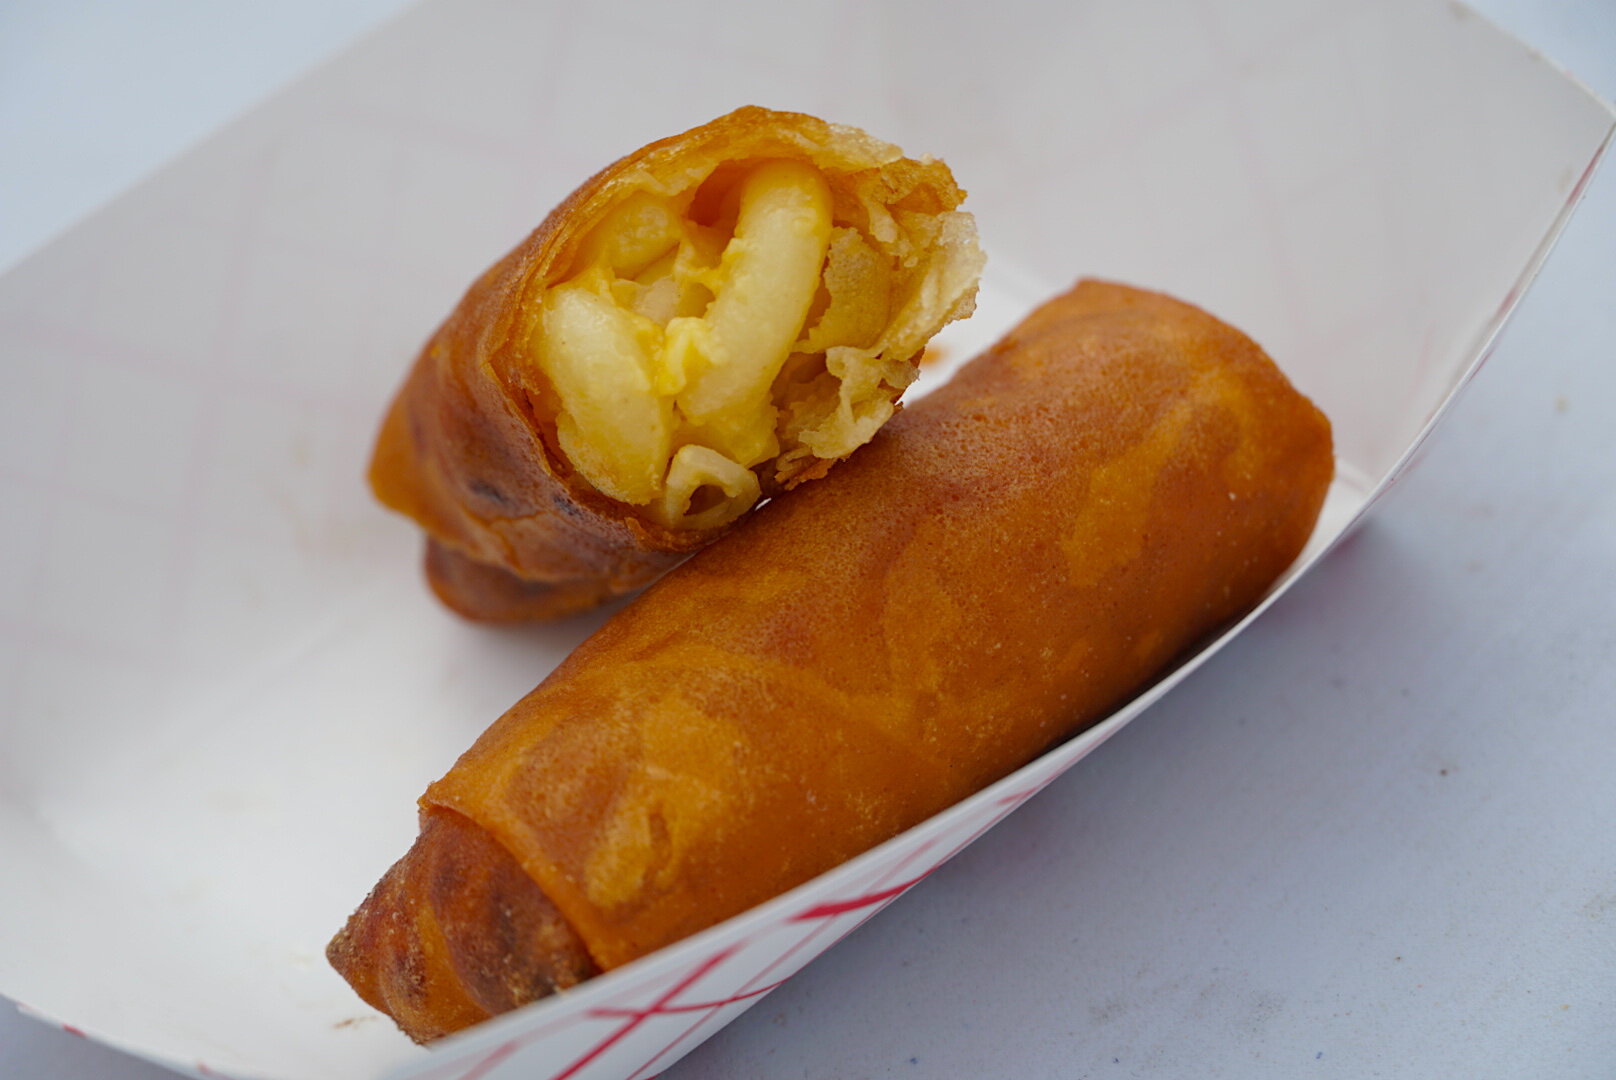 Mac-and-cheese egg rolls from Chau Time.